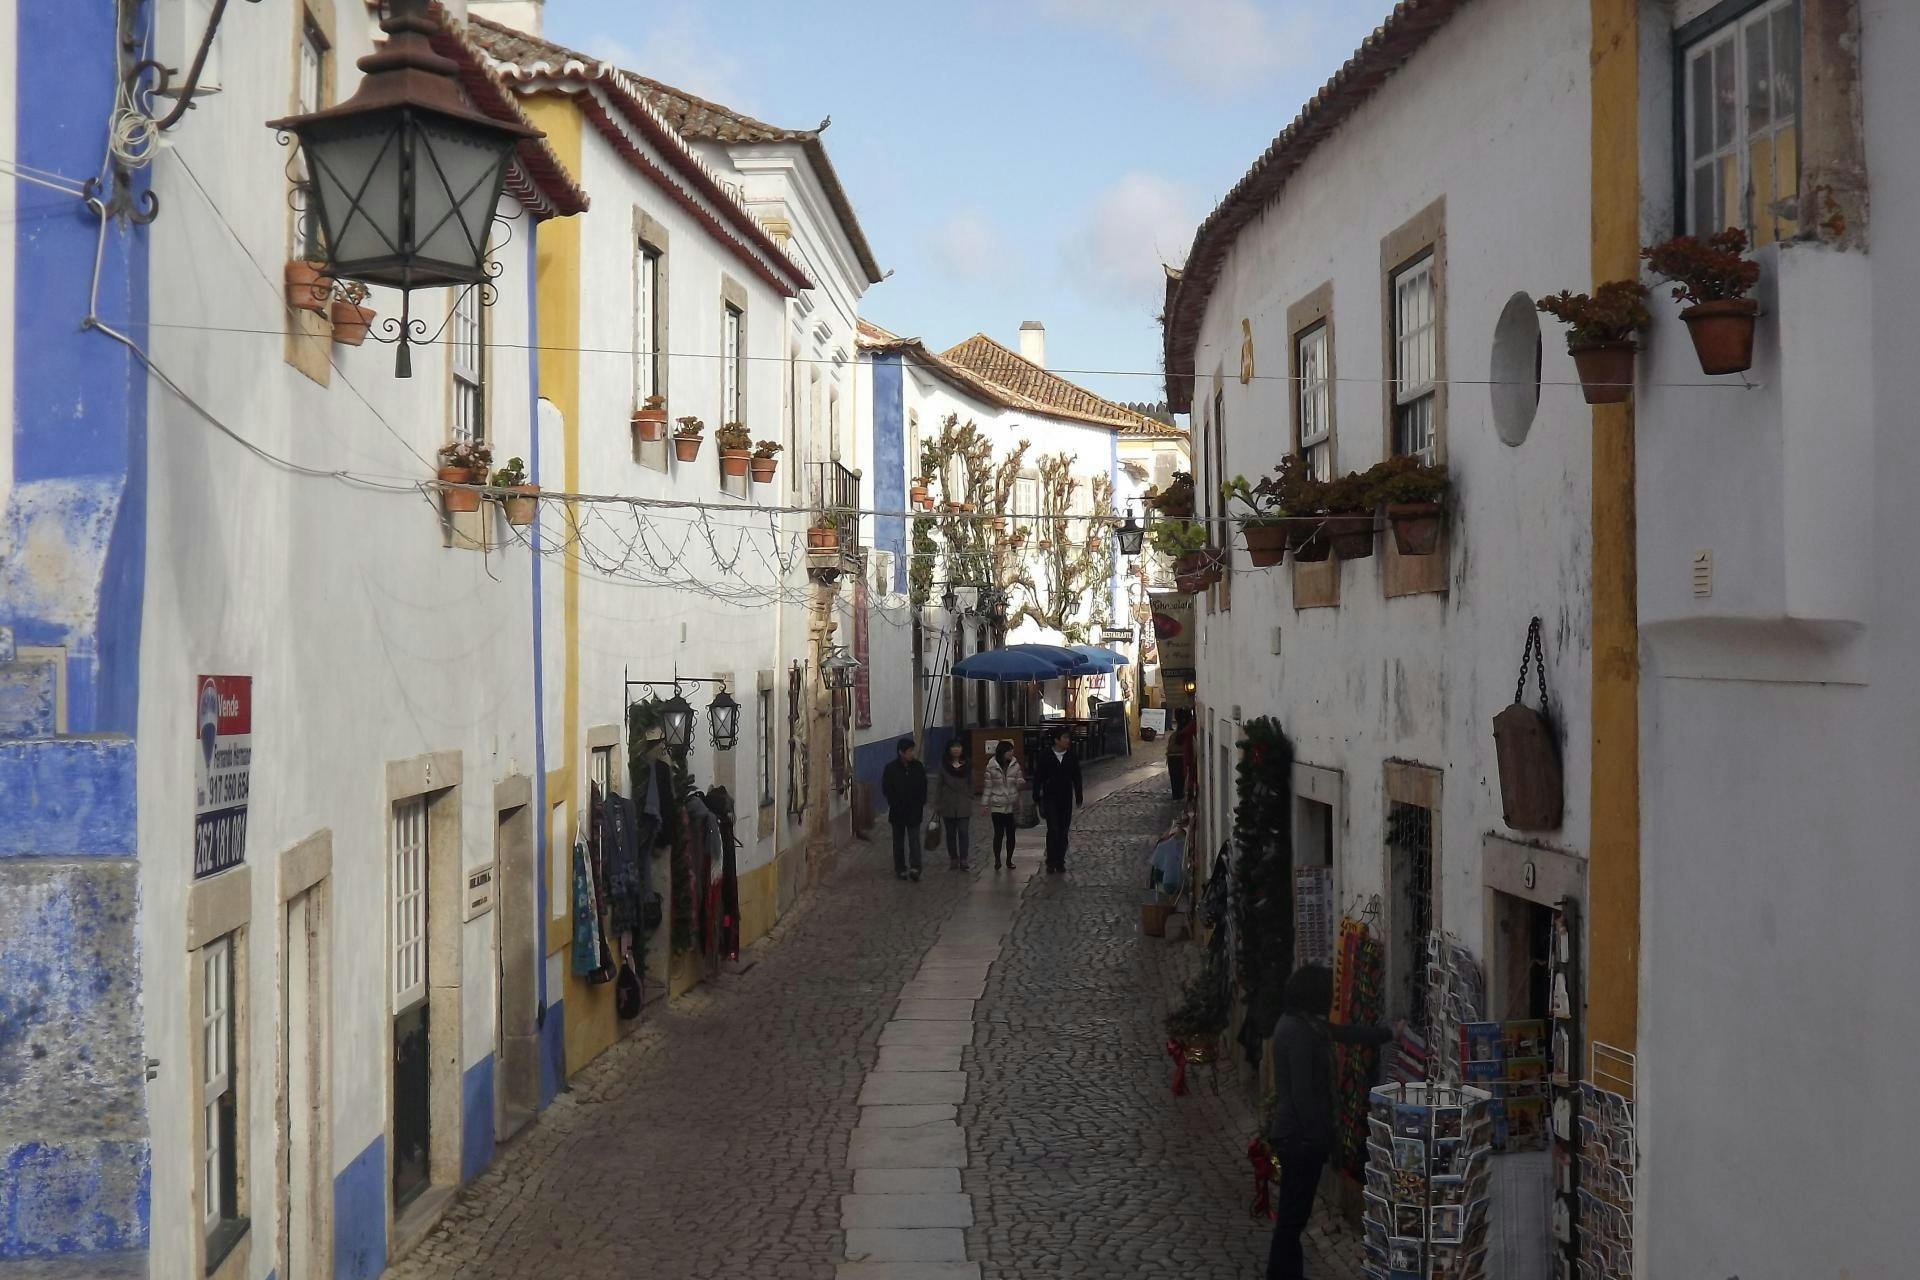 Óbidos audio-guided tour from Lisbon